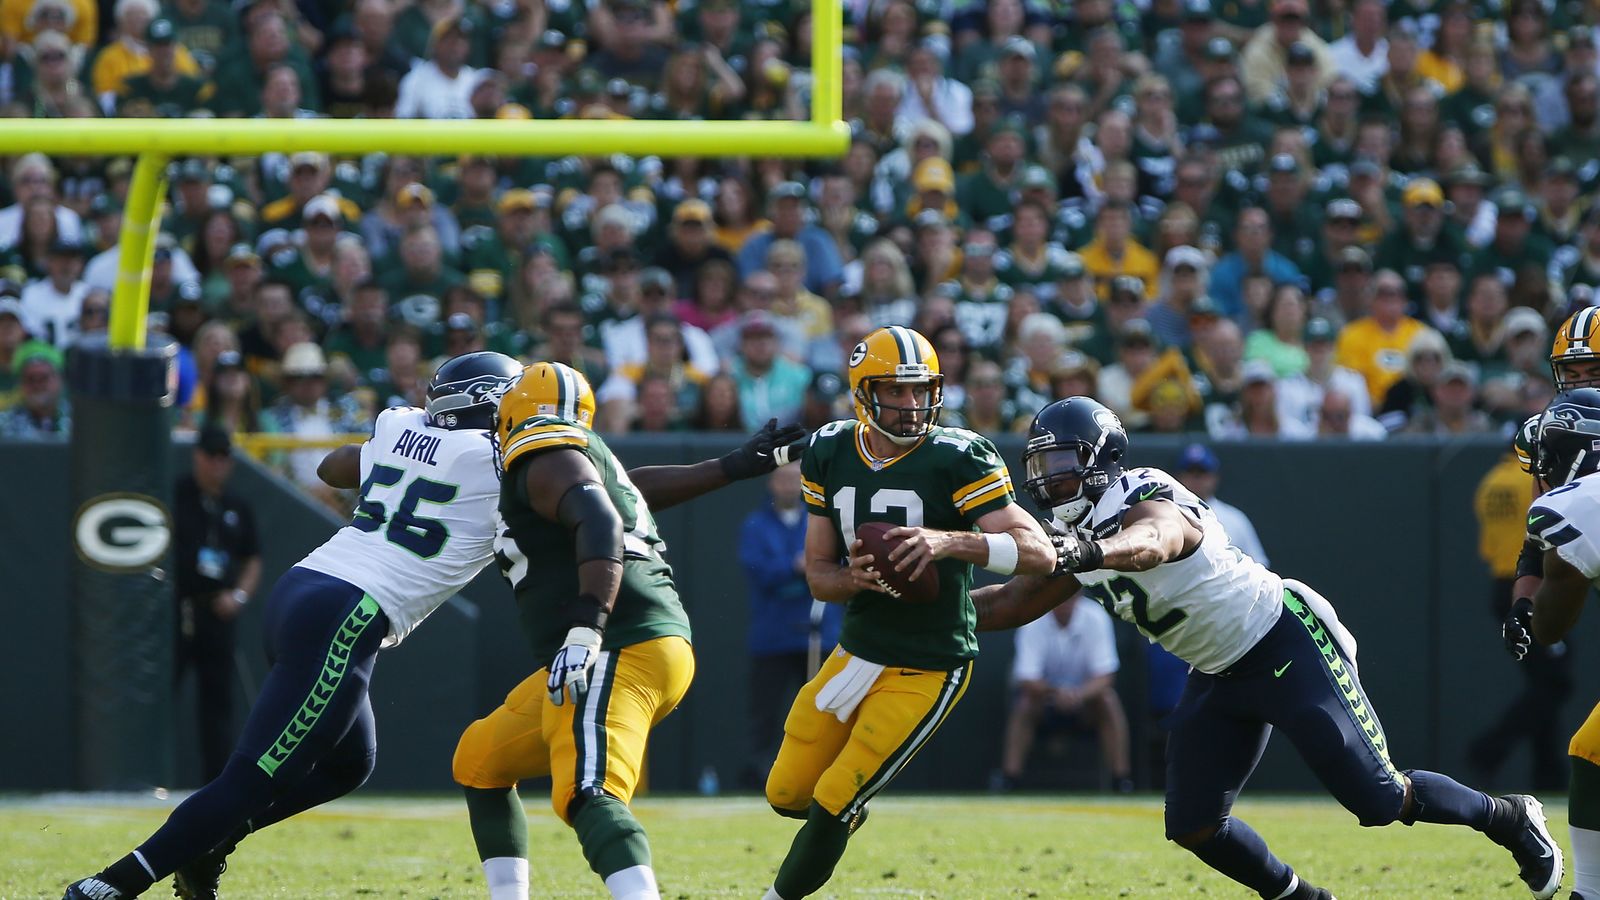 Seattle Seahawks 9-17 Green Bay Packers: Defence dominates as hosts win ...